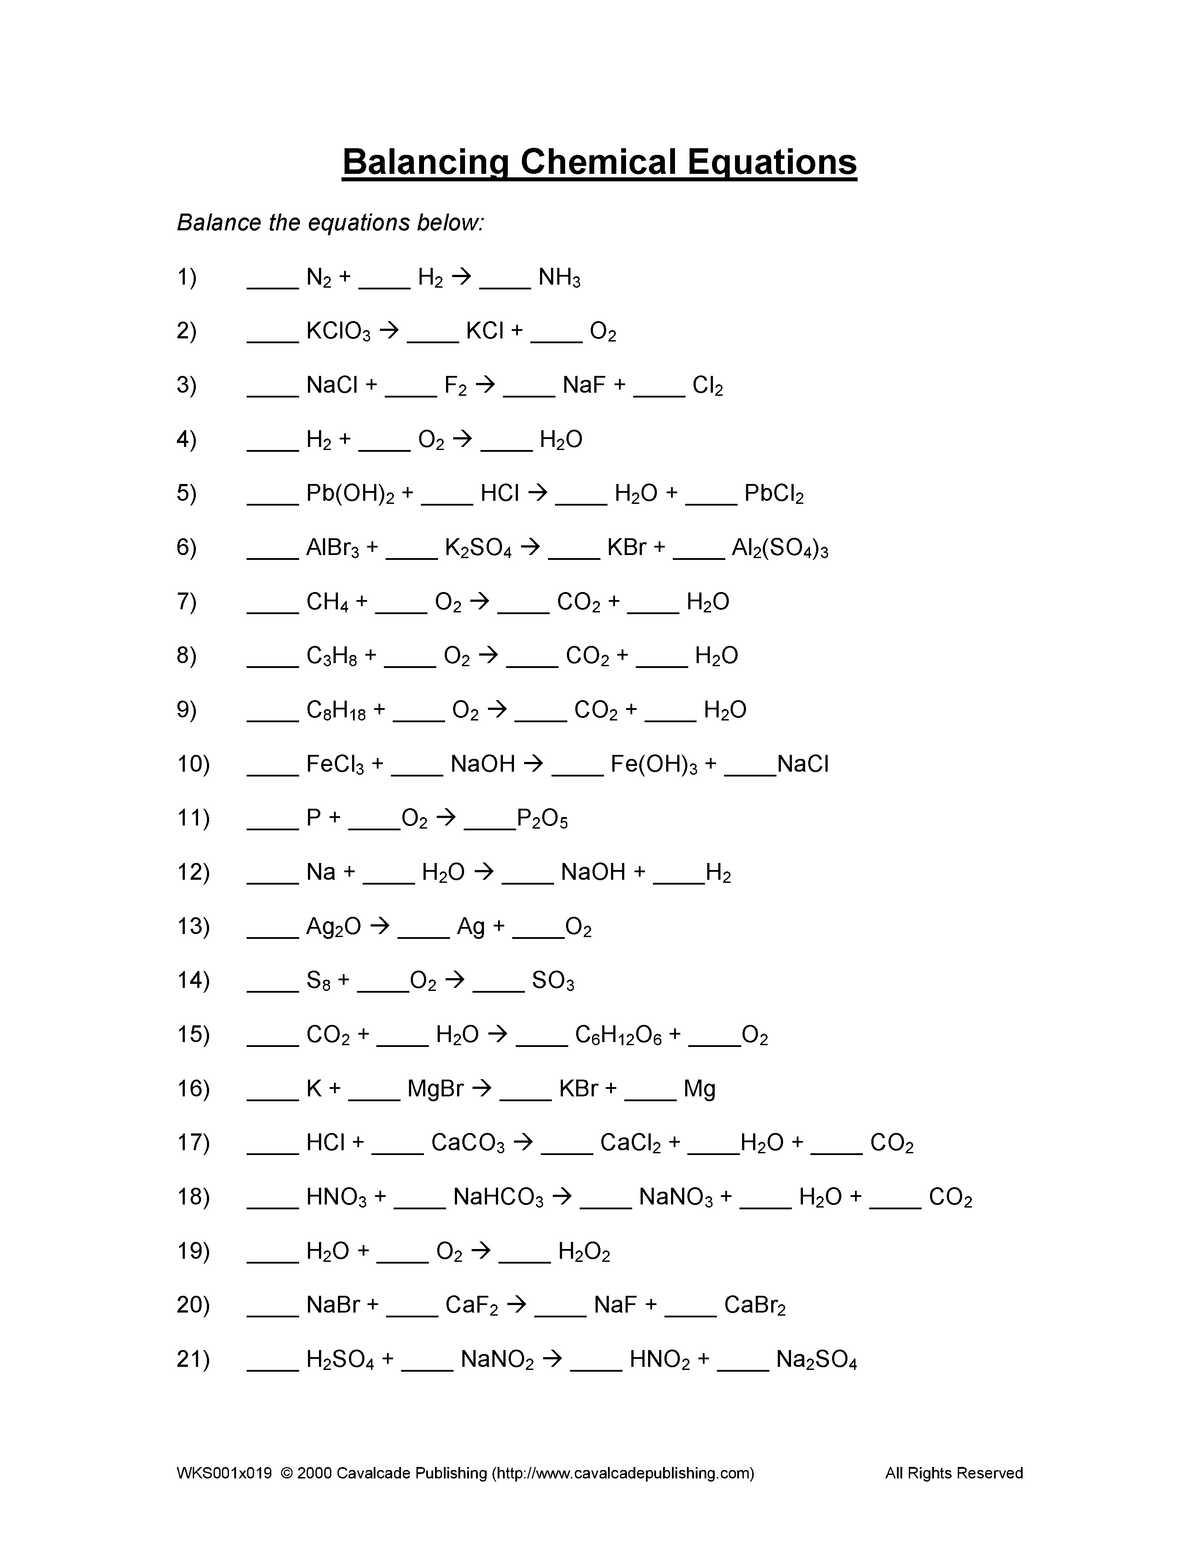 Balancing Equations Practice Worksheet Chemistry - CHEM 21 - StuDocu For Balancing Equations Worksheet Answers Chemistry